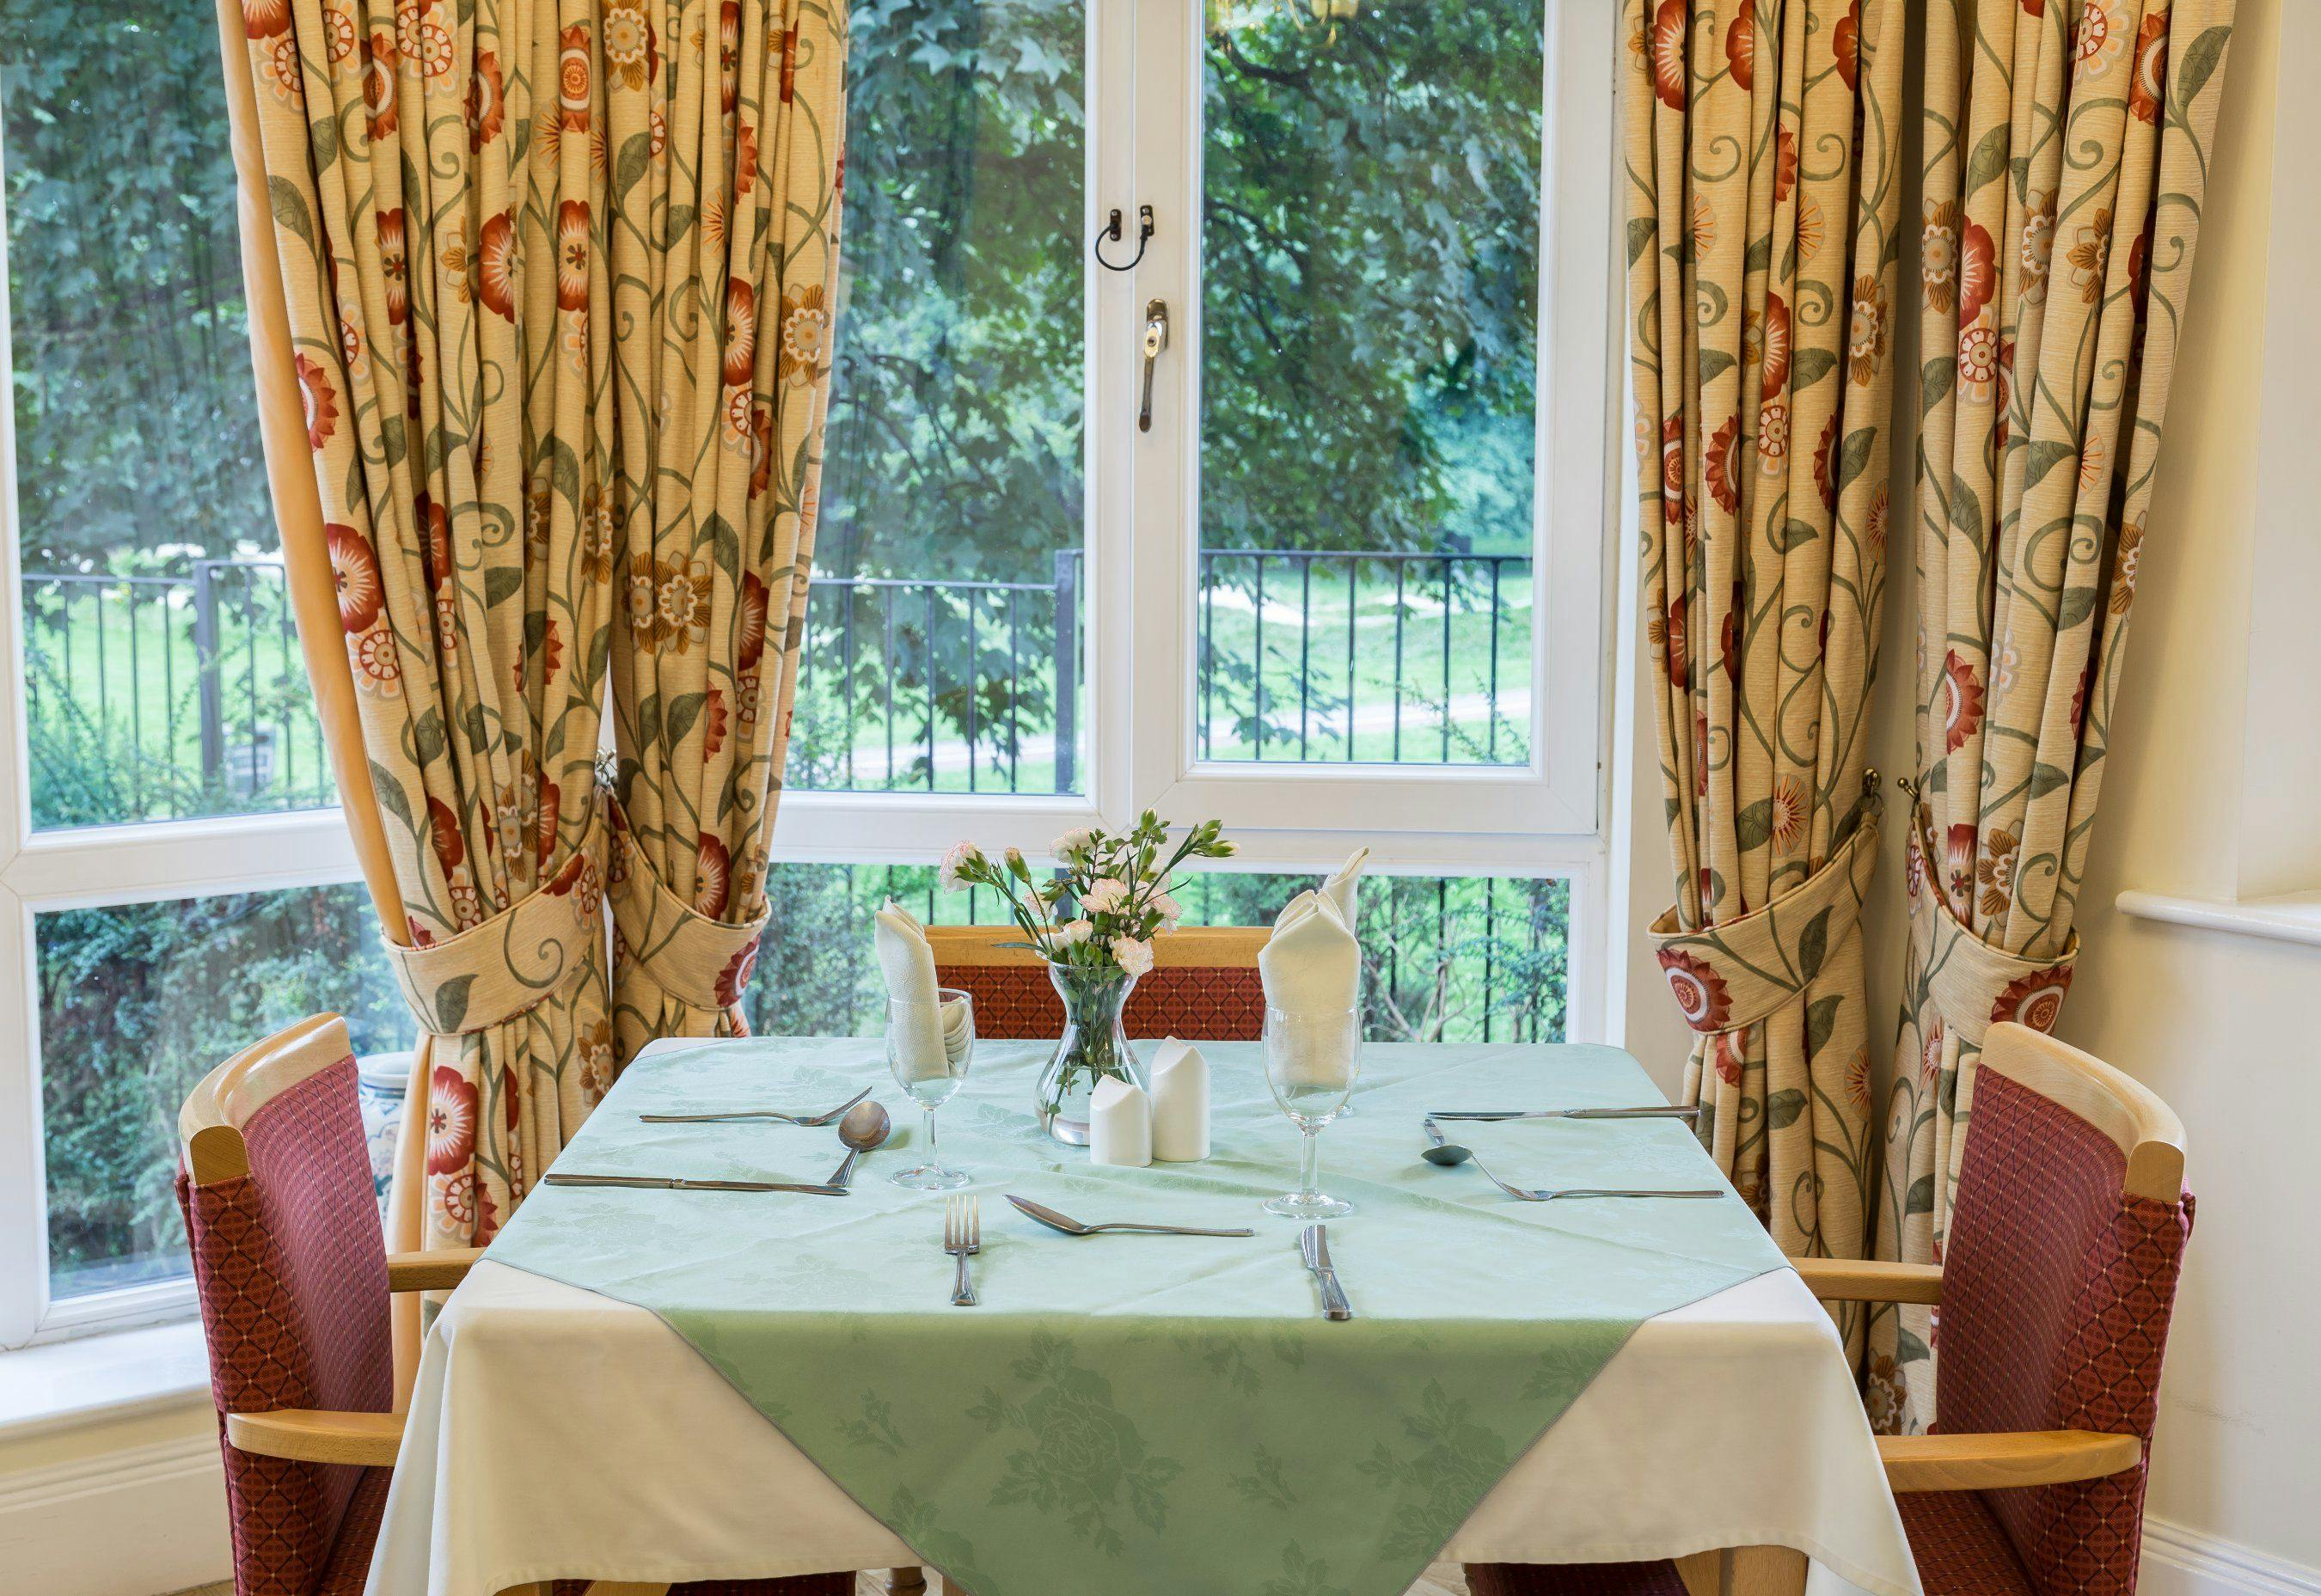 The Dining Room at North Park Care Home in Darlington, North East England